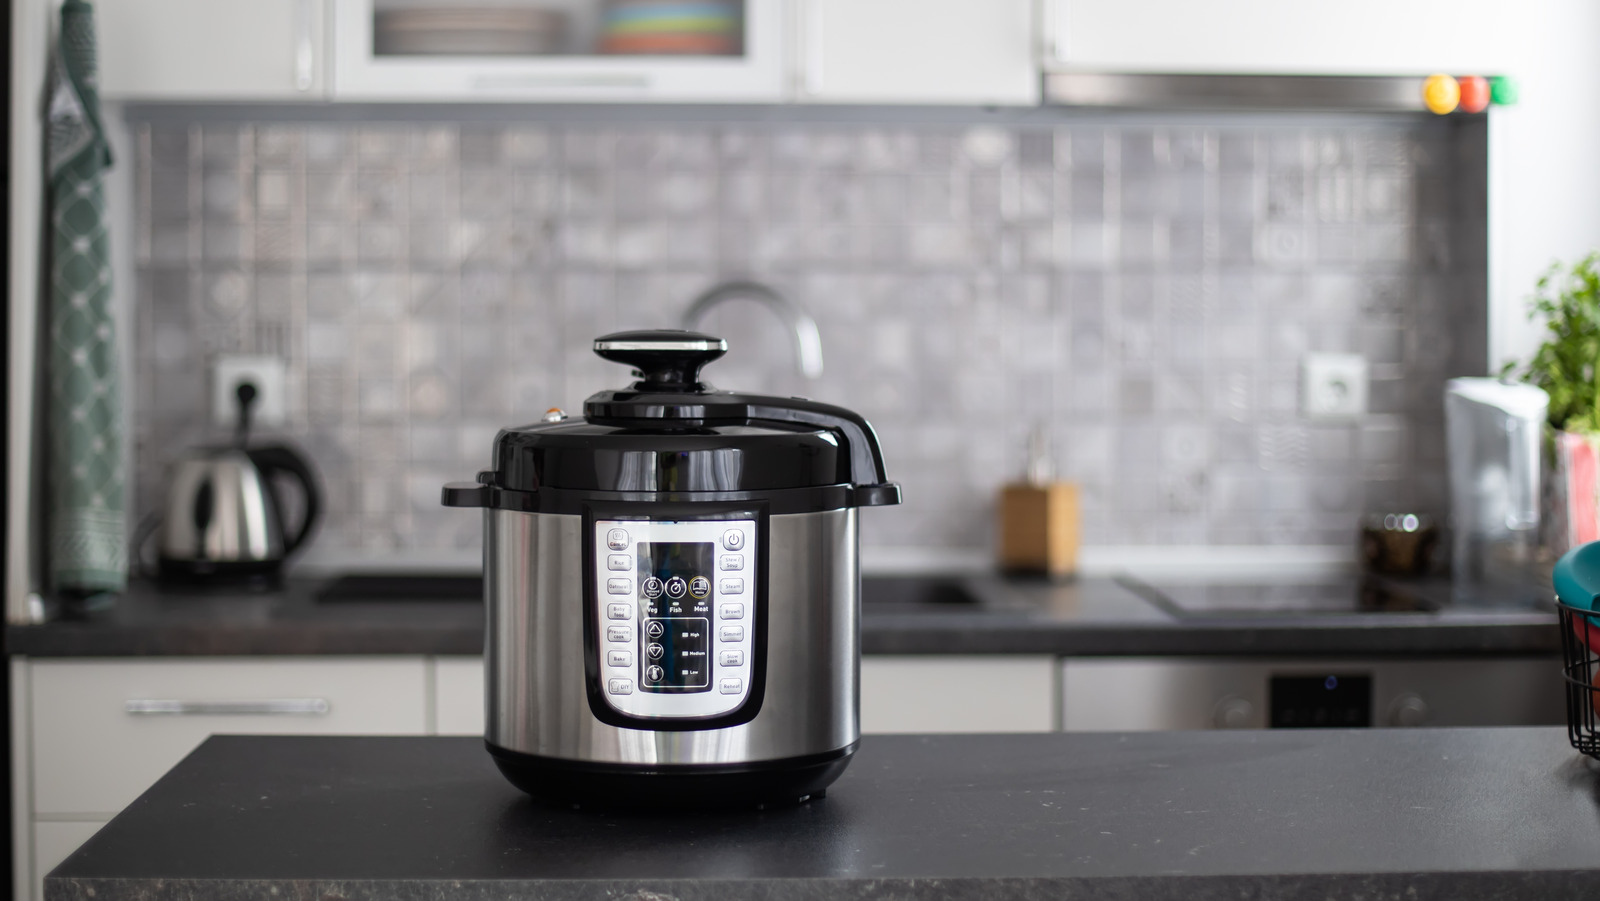 Tips You Need When Cooking With A Pressure Cooker